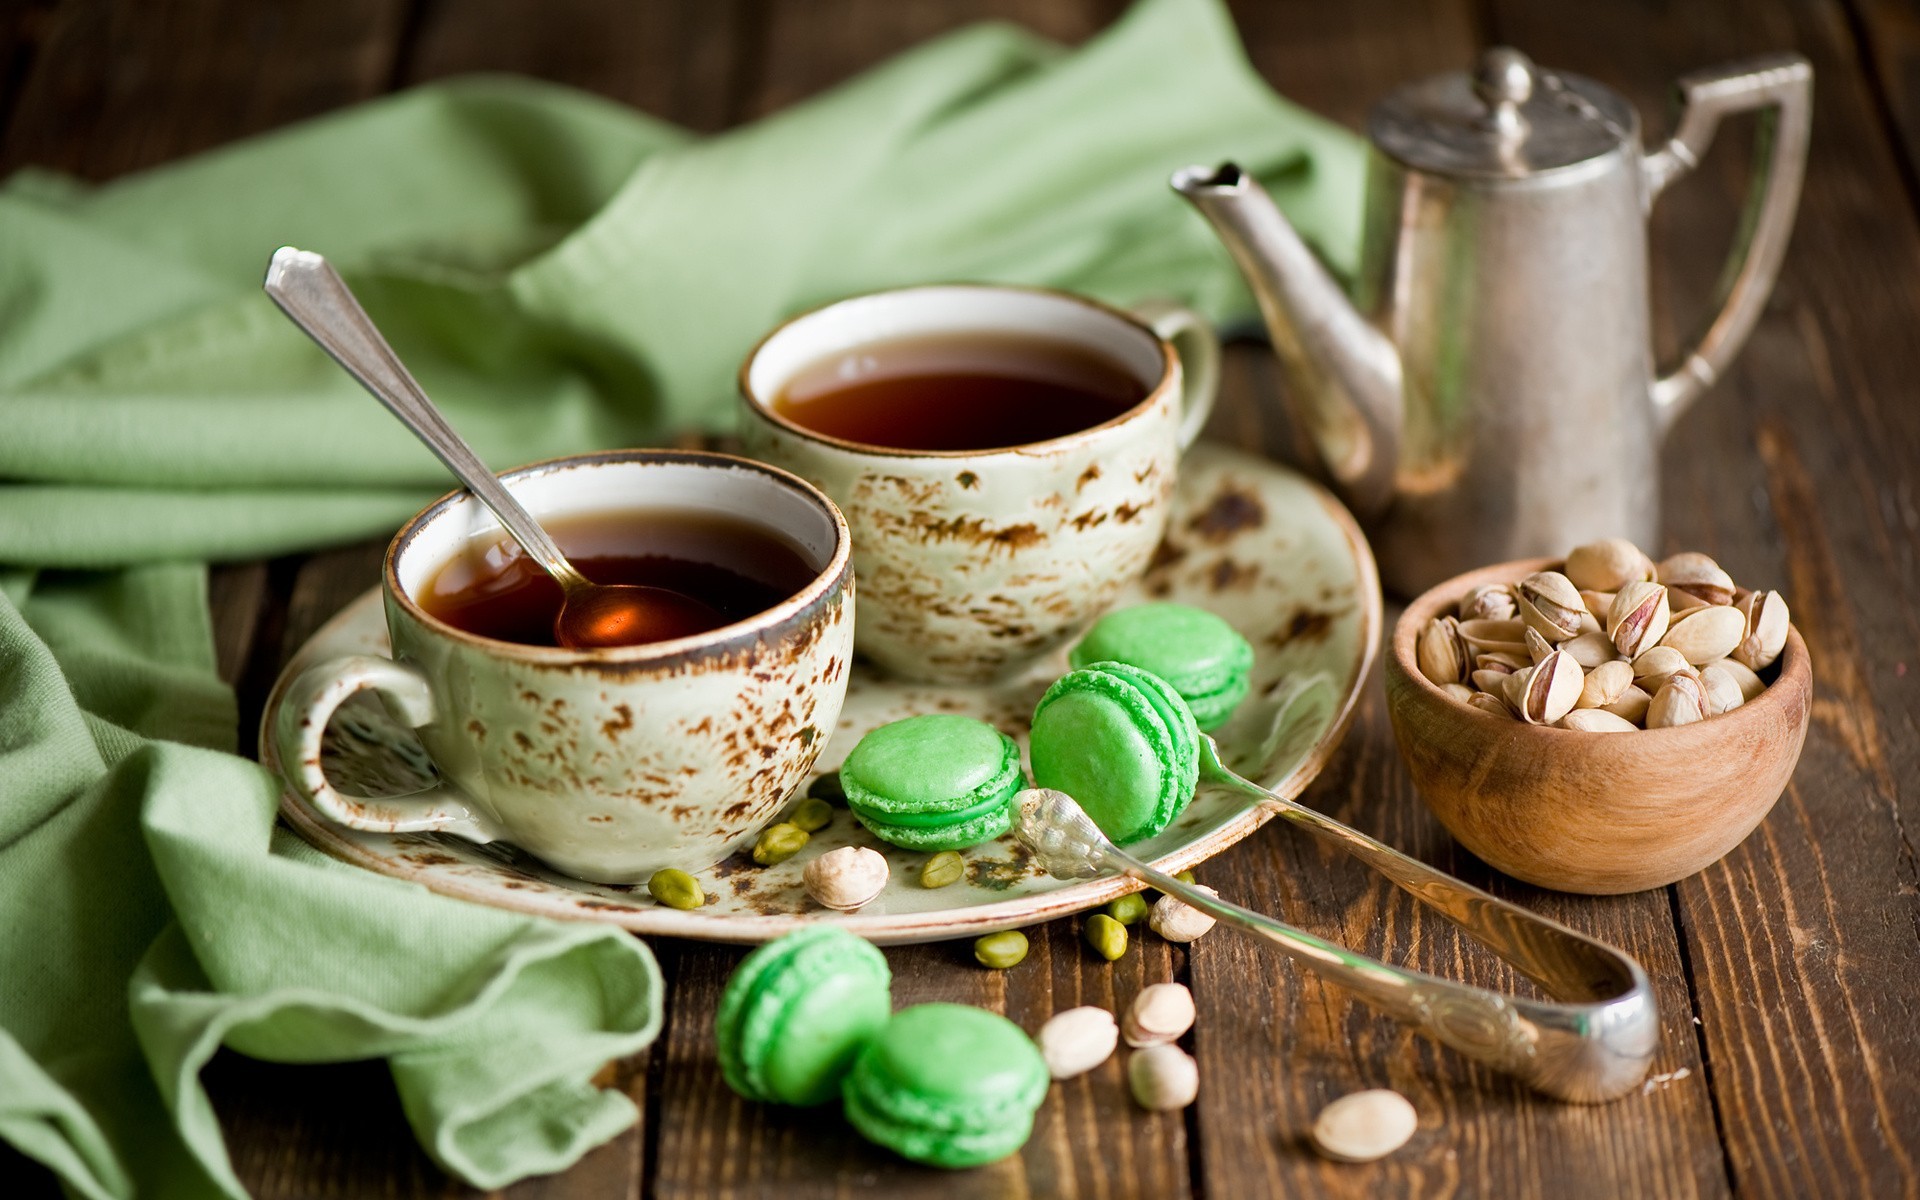 tea, Cup, Bowls, Spoons, Fabric, Wooden Surface Wallpaper